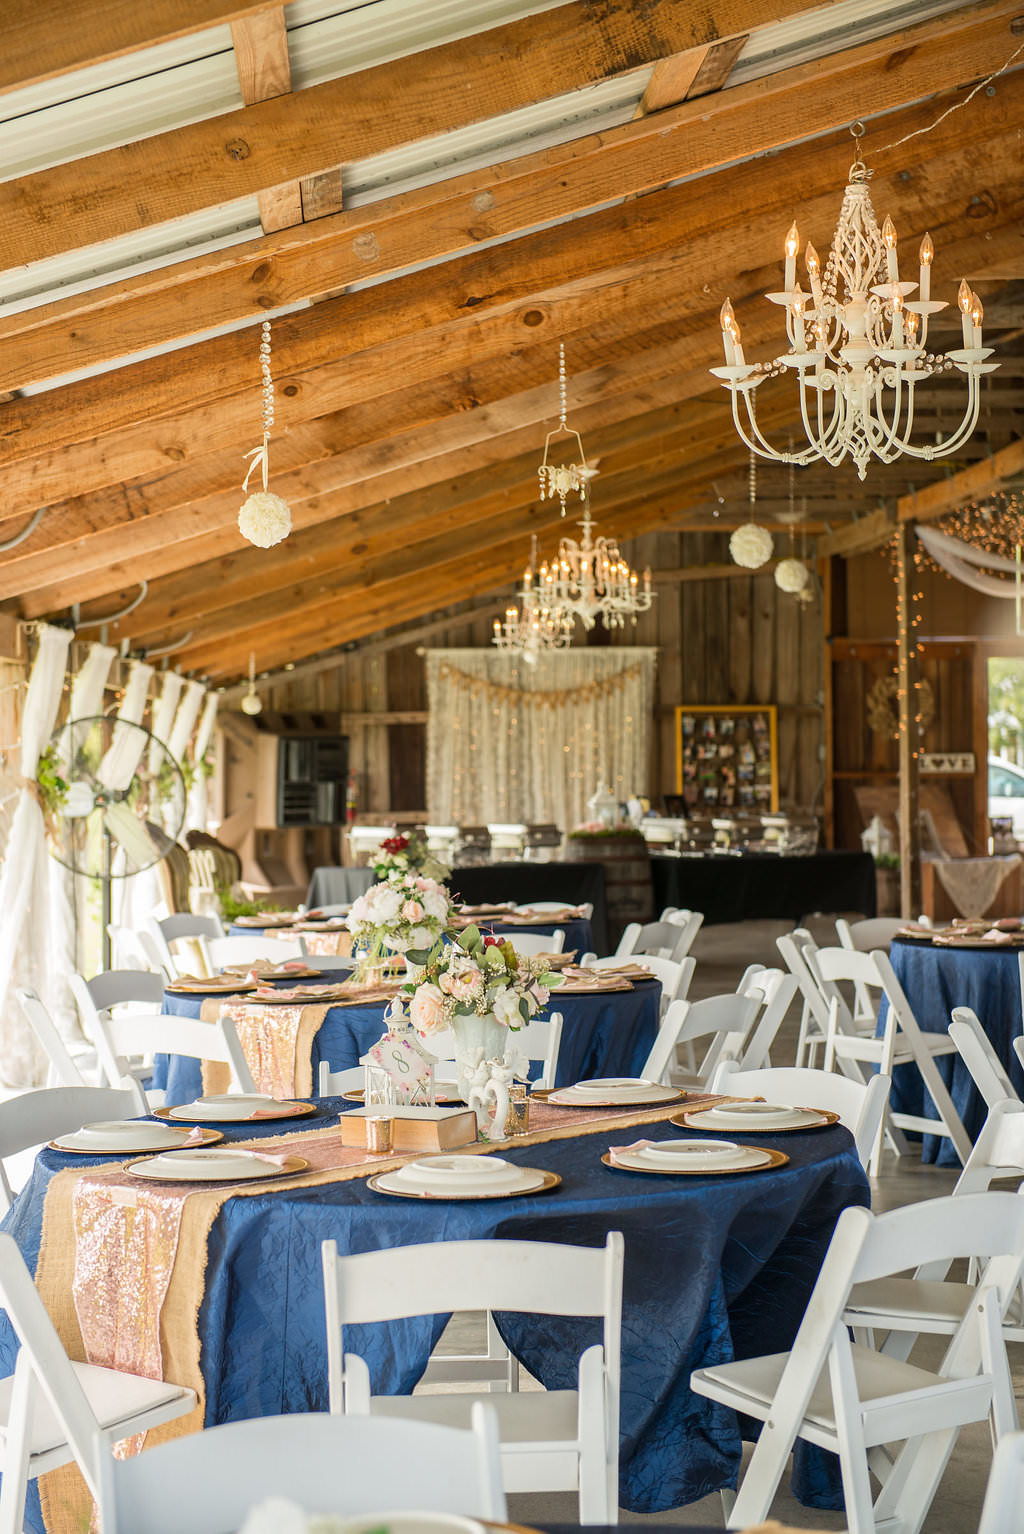 Rustic Wedding Reception with Round Tables with Navy Blue Linens and Burlap Runners, Low Peach, Red, and Greenery Centerpiece, White Folding Chairs, and Vintage Chandeliers | Tampa Bay Wedding Venue Wishing Well Barn